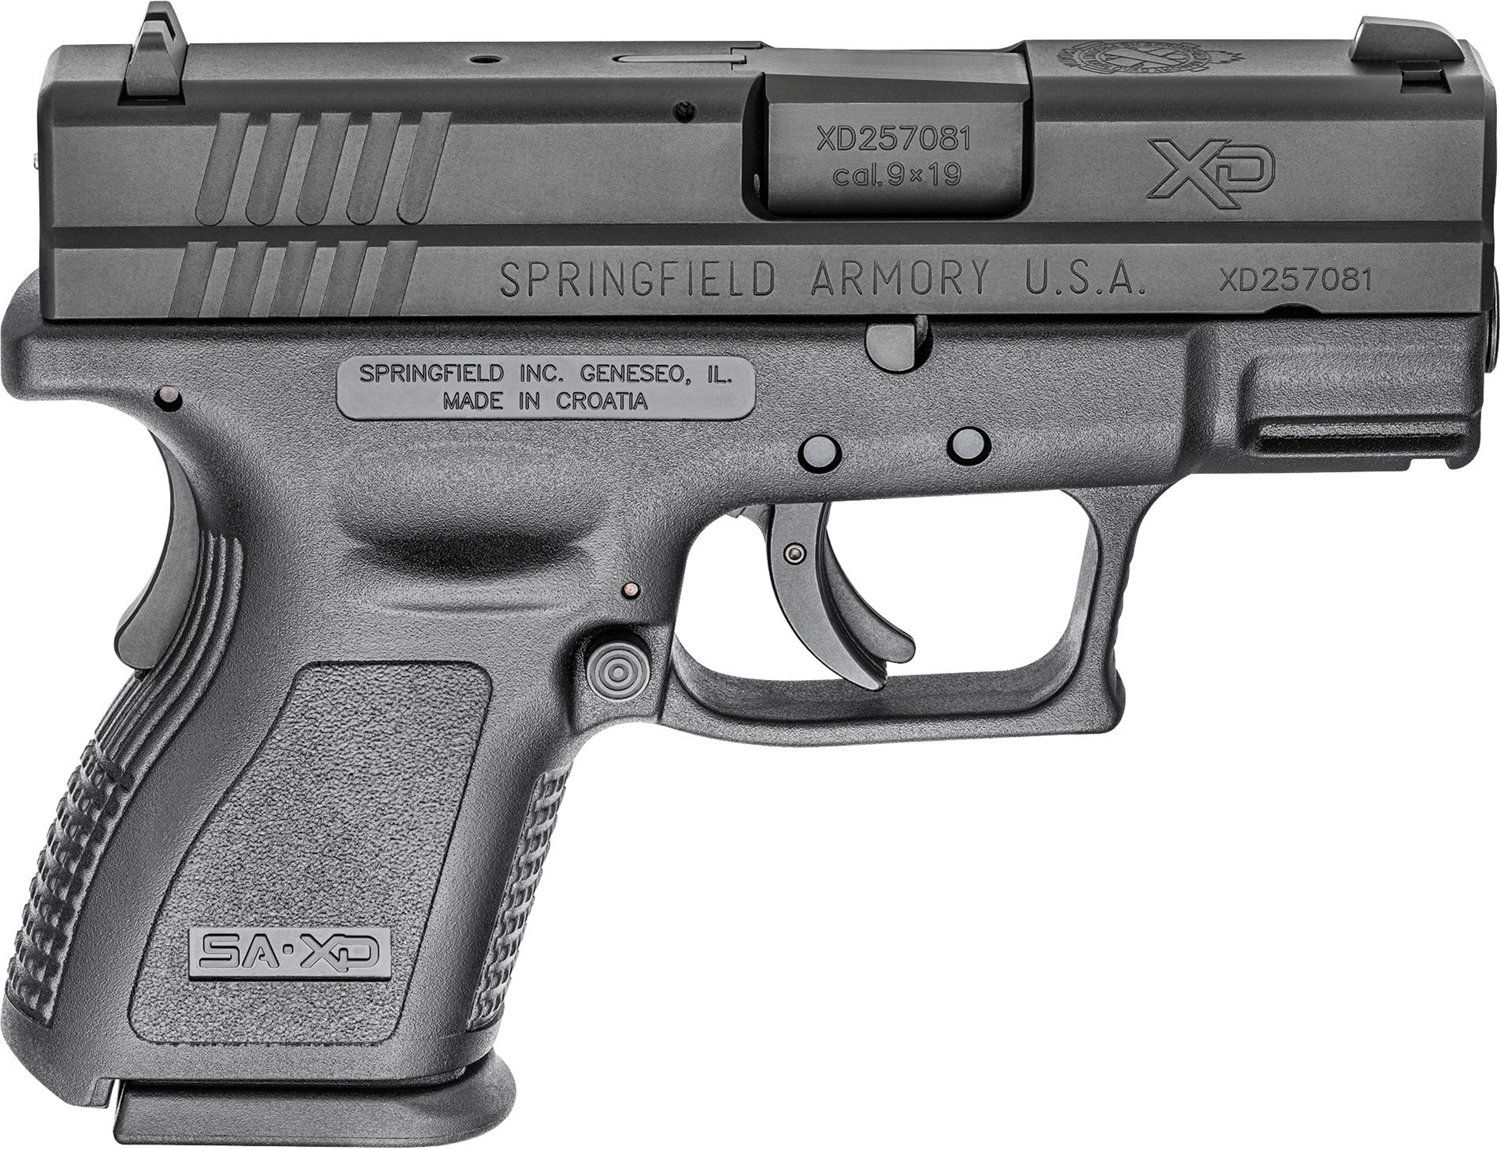 springfield-armory-pi9125l-1911-range-officer-compact-9mm-luger-4-8-1